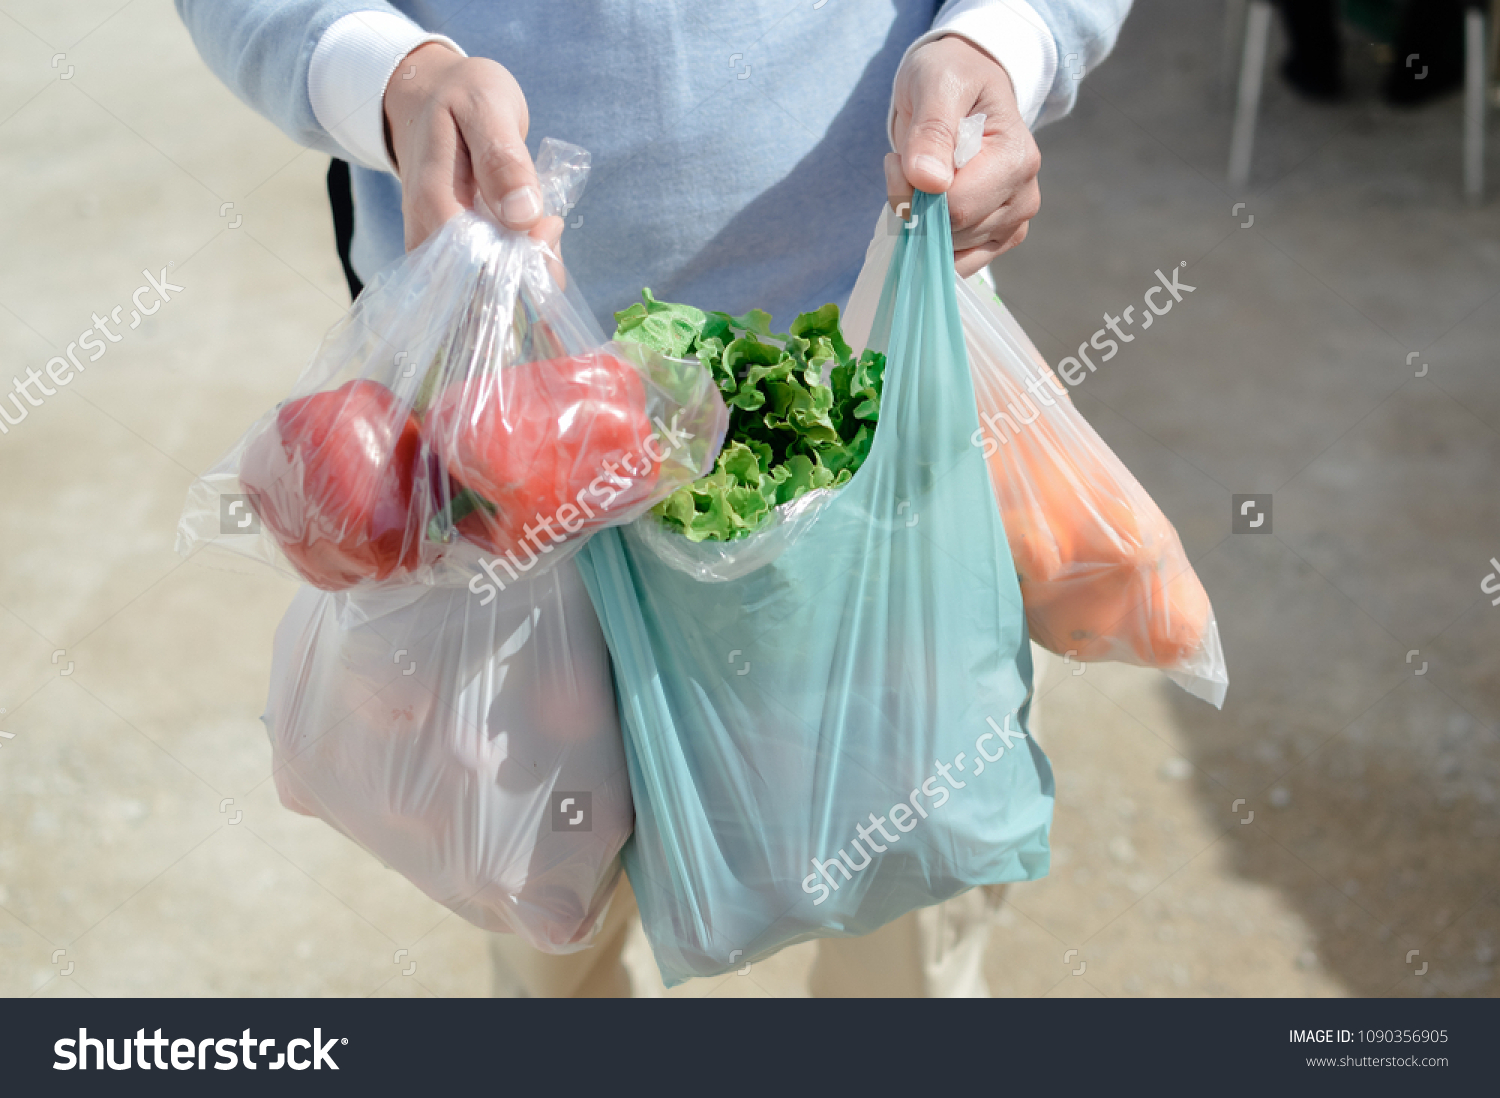 Close up on person buyer hold groceries in bags. Buy sell vegetables. Healthy wellbeing lifestyle background #1090356905